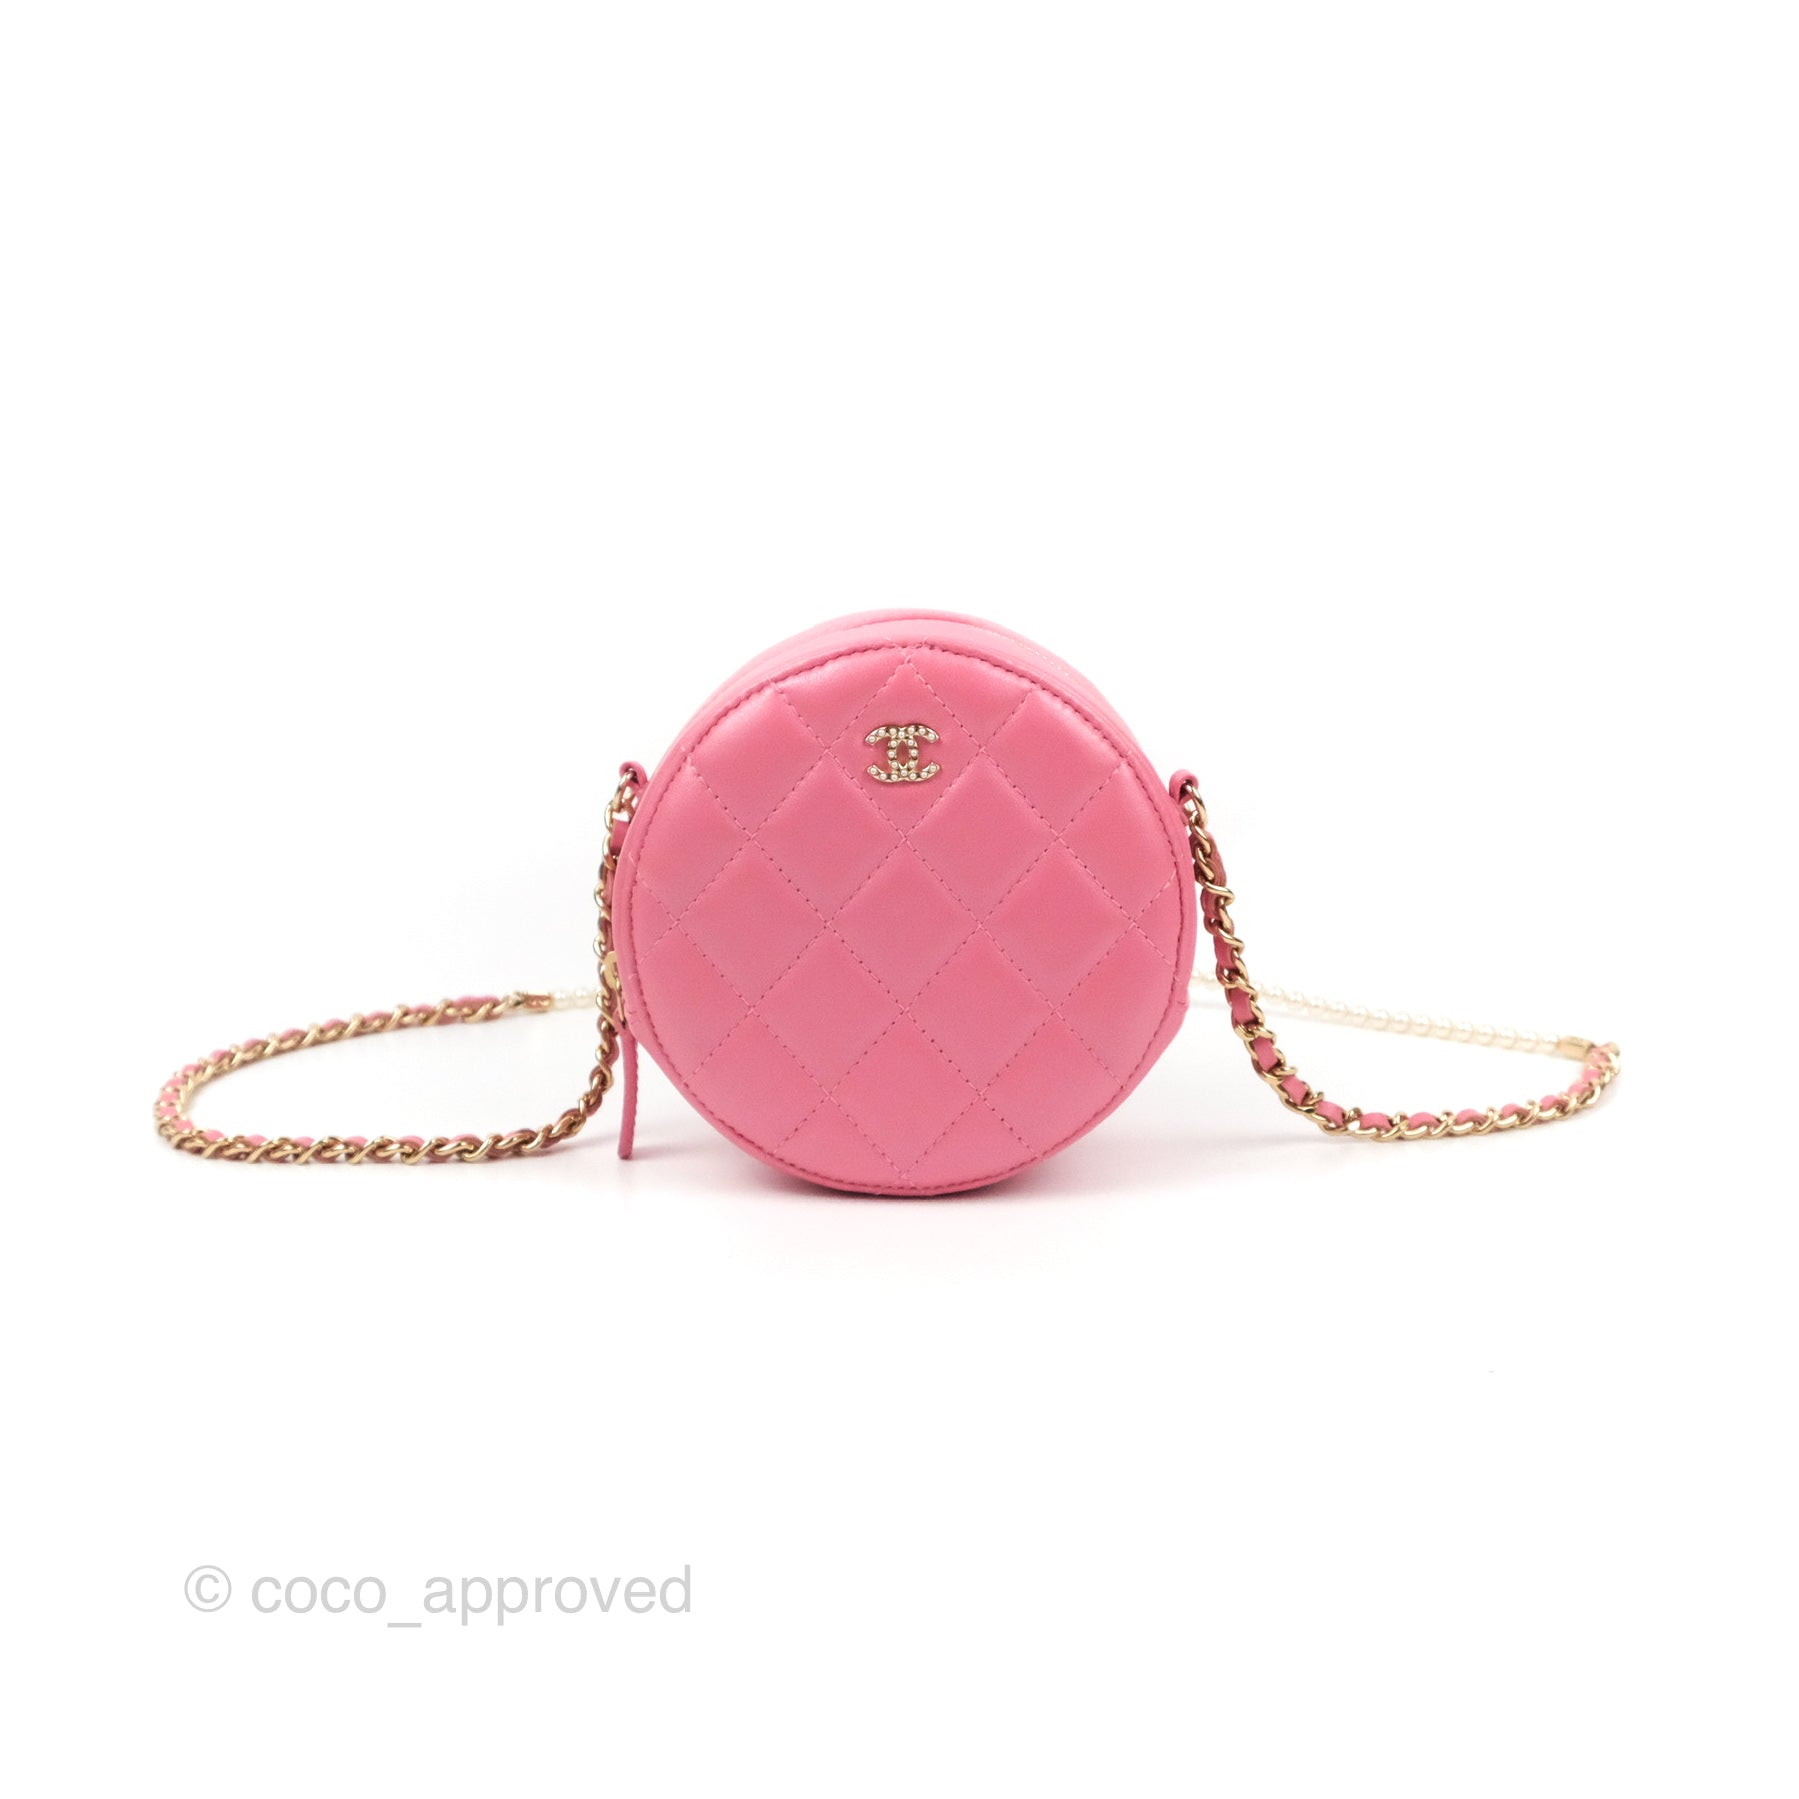 Chanel Patent Calfskin and PVC Filigree Round Clutch with Chain Silver Hardware, 2020, Blue/Pink Womens Handbag